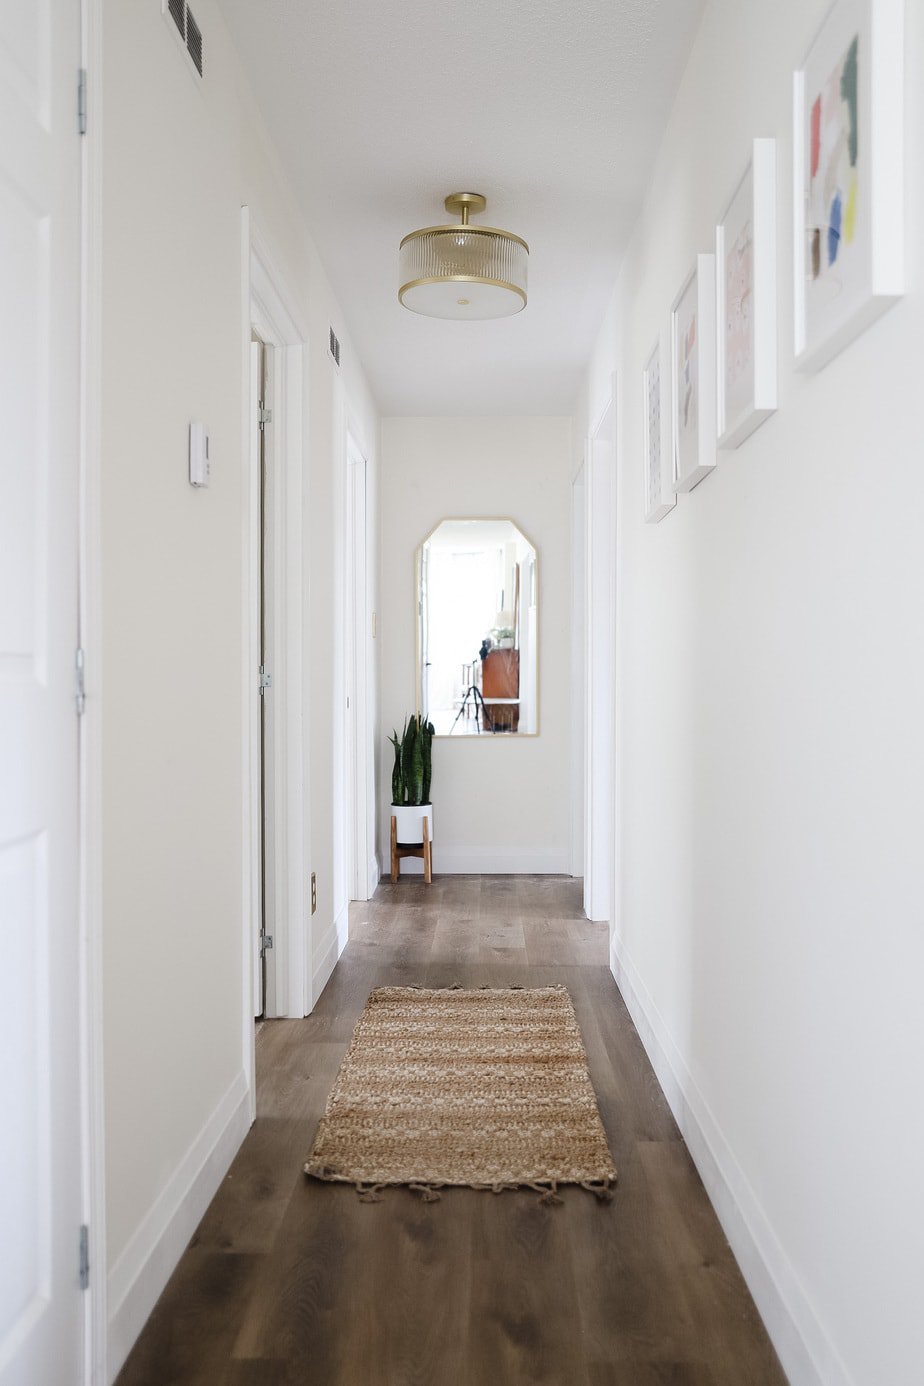 Top Decorating Ideas for a Dark, Narrow, or Small Hallway